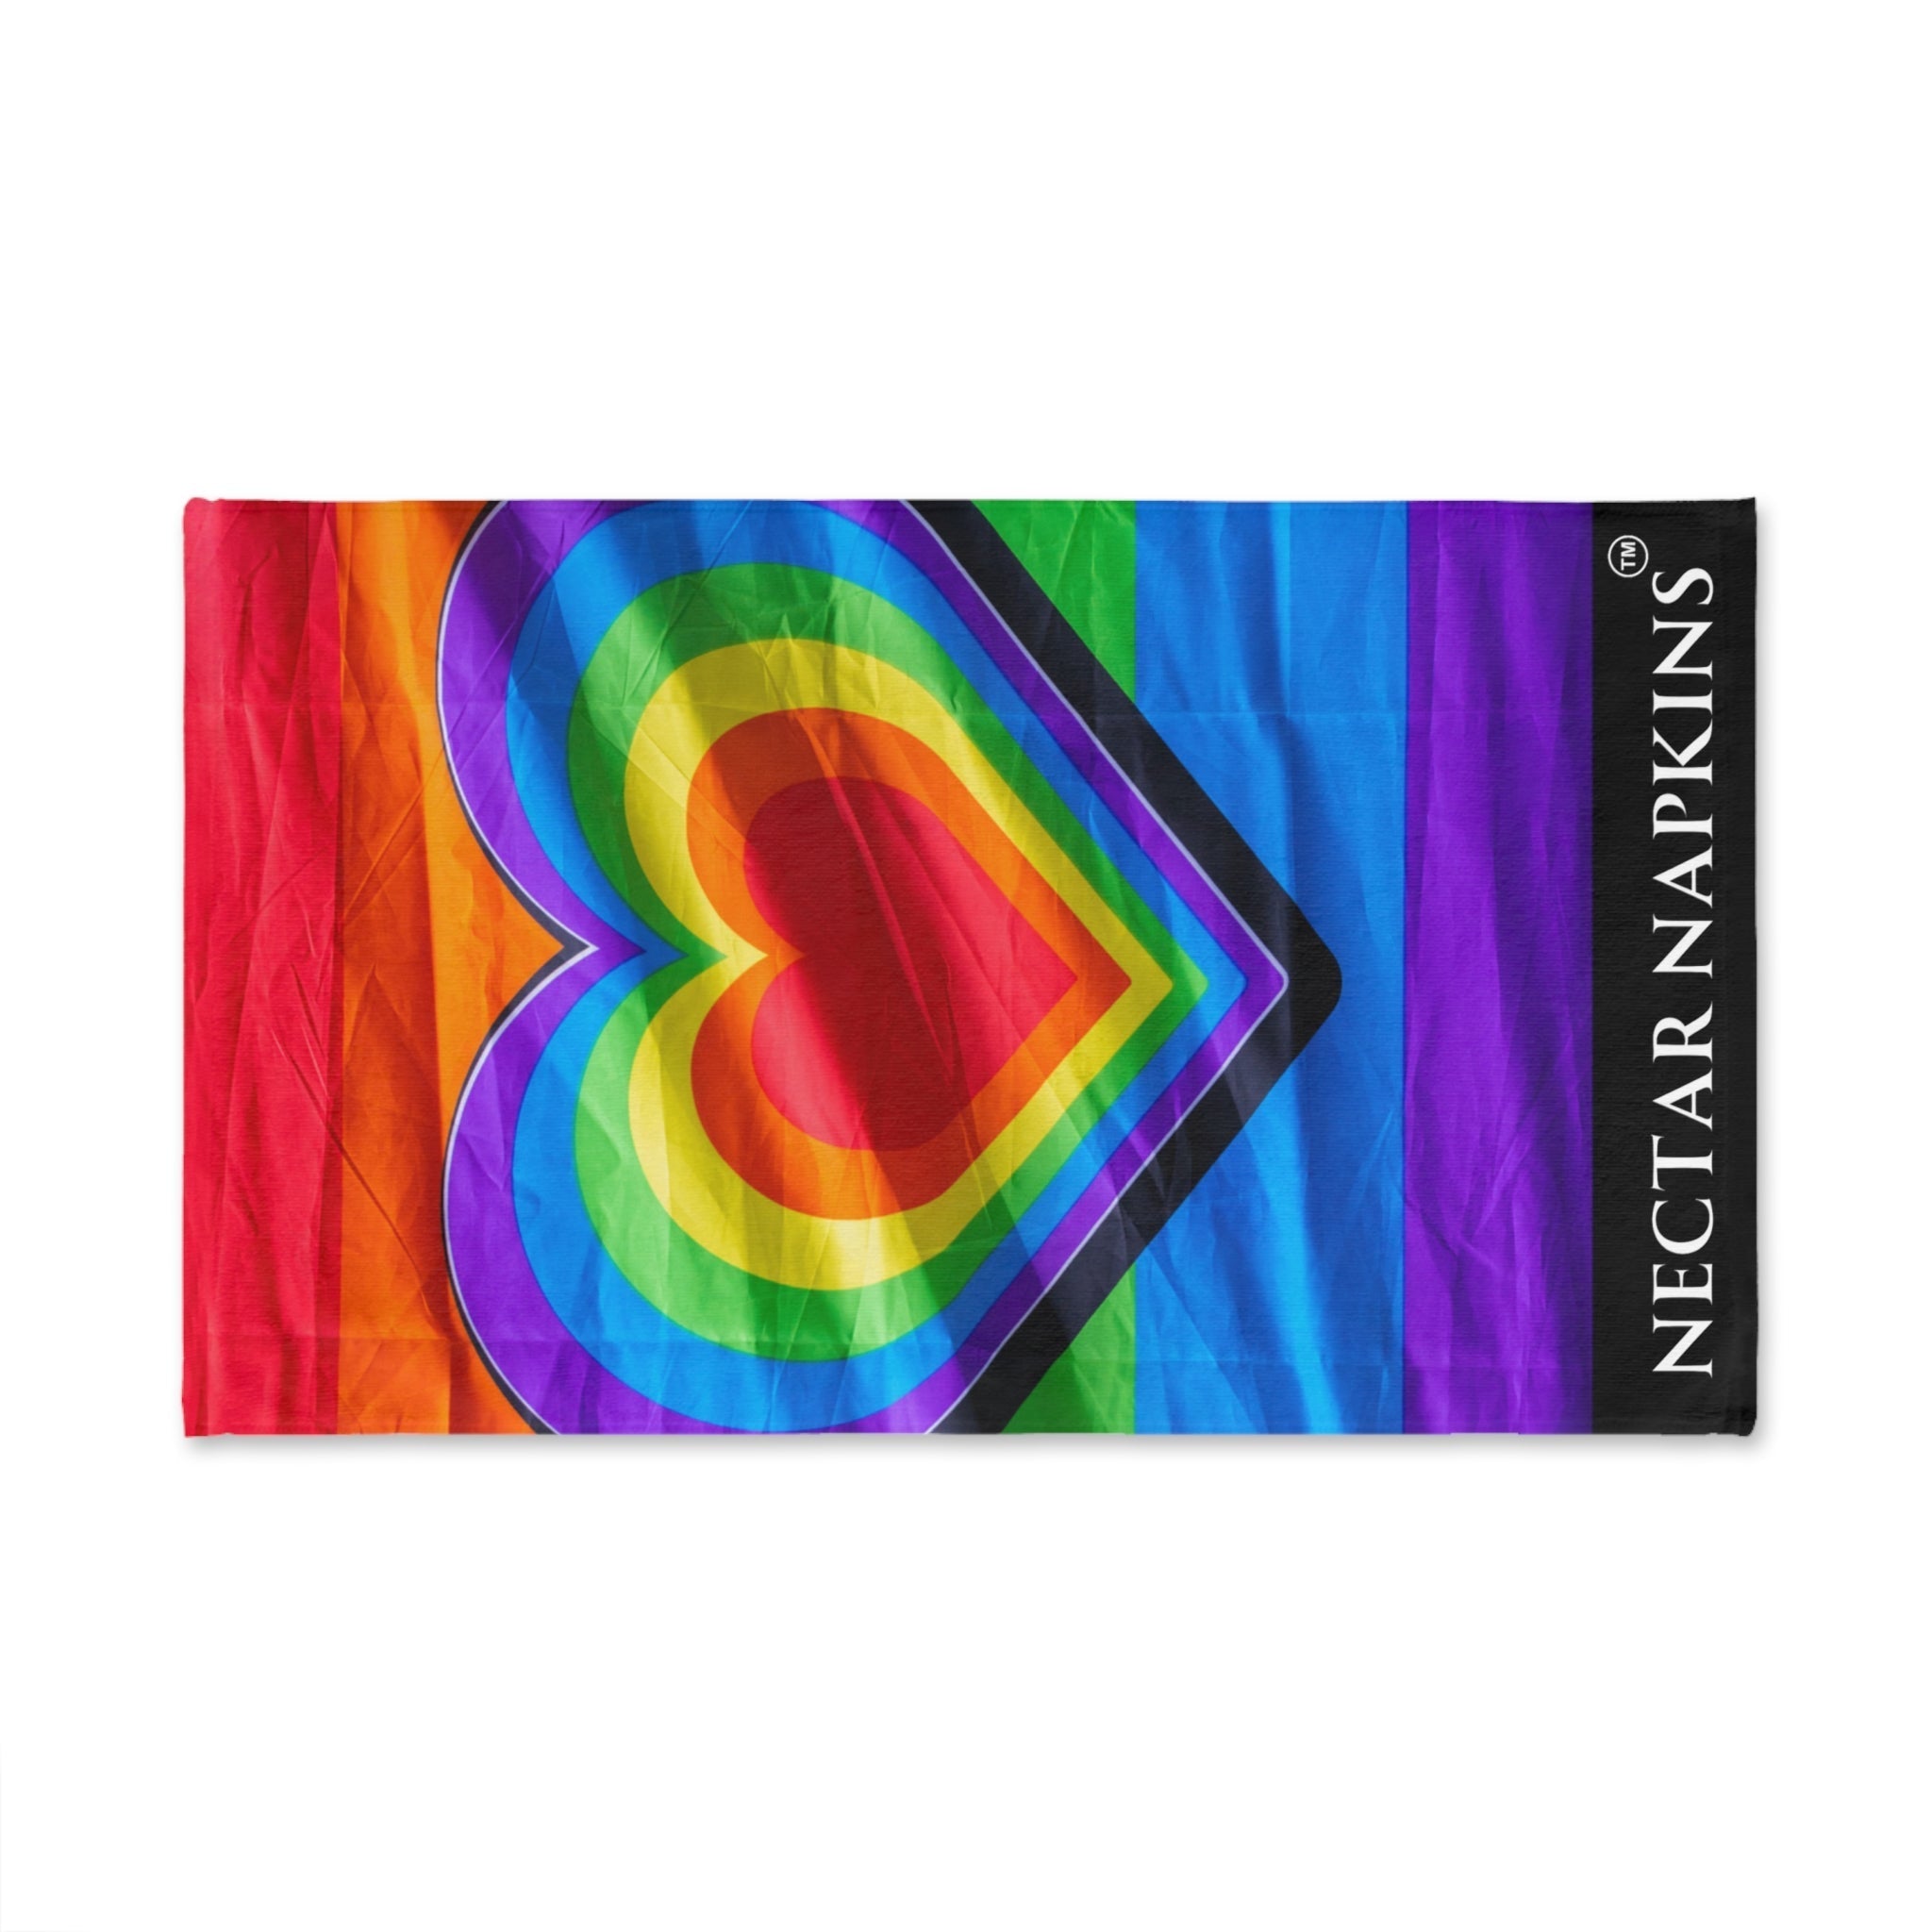 Rain Bow Heart 3D Black | Sexy Gifts for Boyfriend, Funny Towel Romantic Gift for Wedding Couple Fiance First Year 2nd Anniversary Valentines, Party Gag Gifts, Joke Humor Cloth for Husband Men BF NECTAR NAPKINS